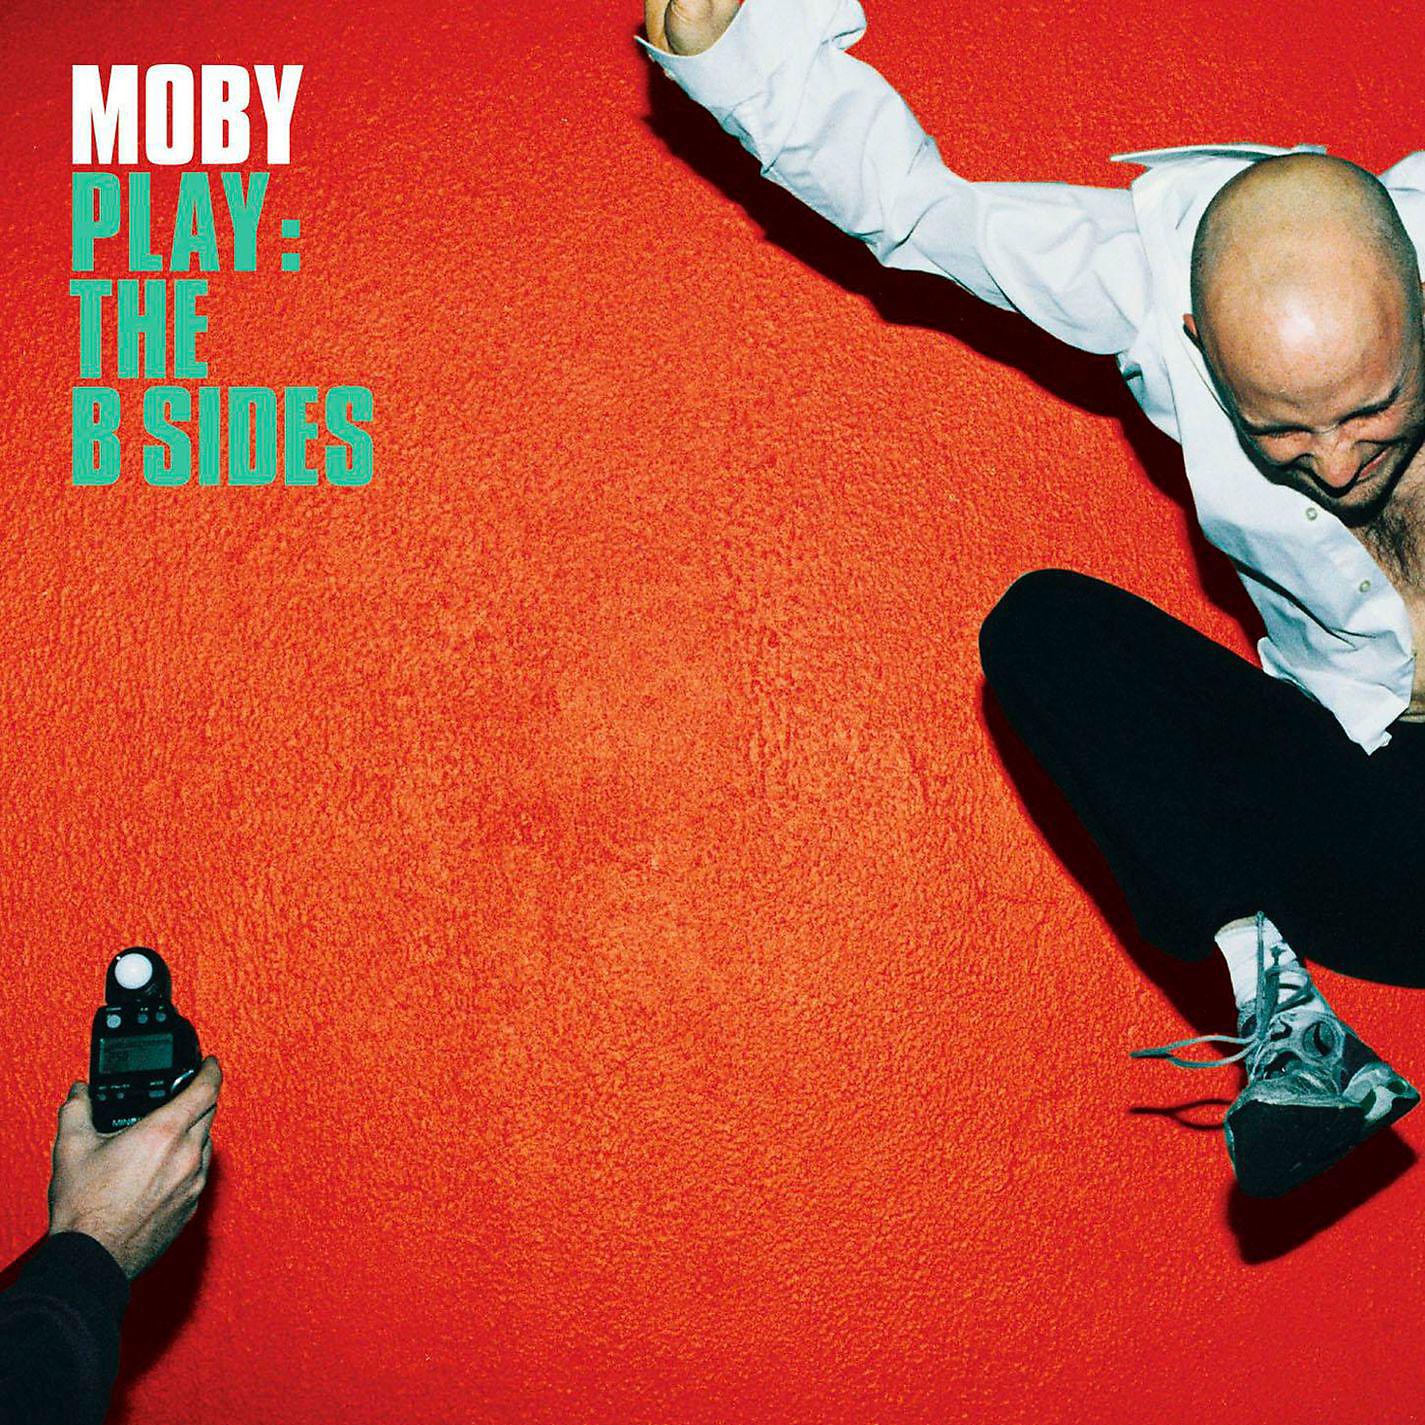 Moby play